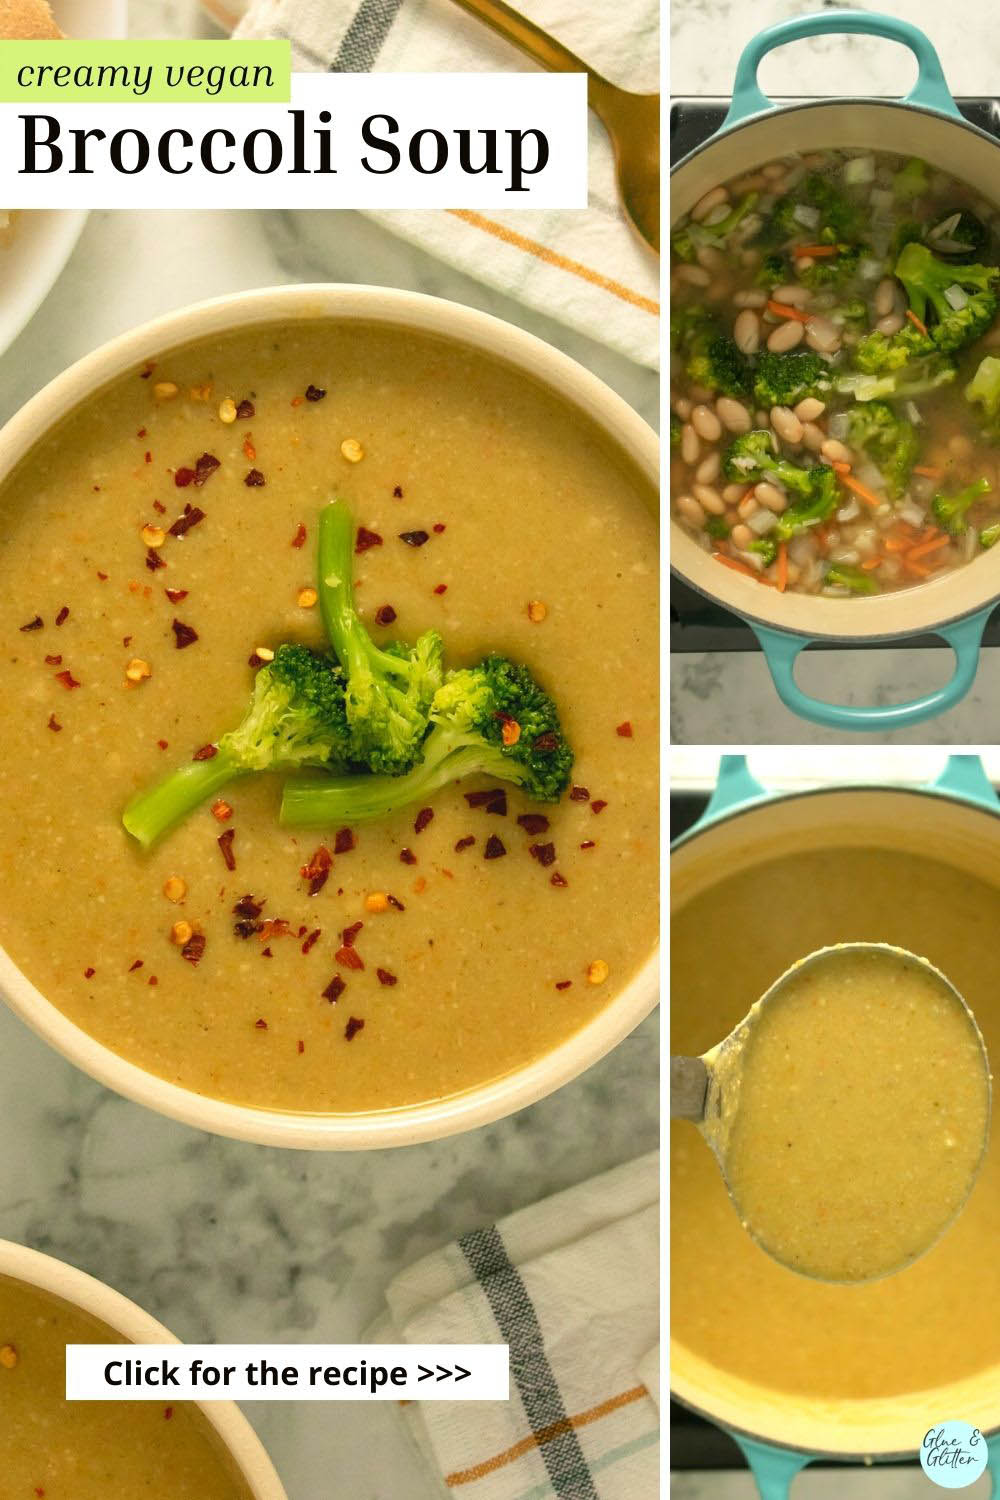 image collage of creamy broccoli soup, veggies and broth in the pot, and spooning the soup with a ladle, text overlay